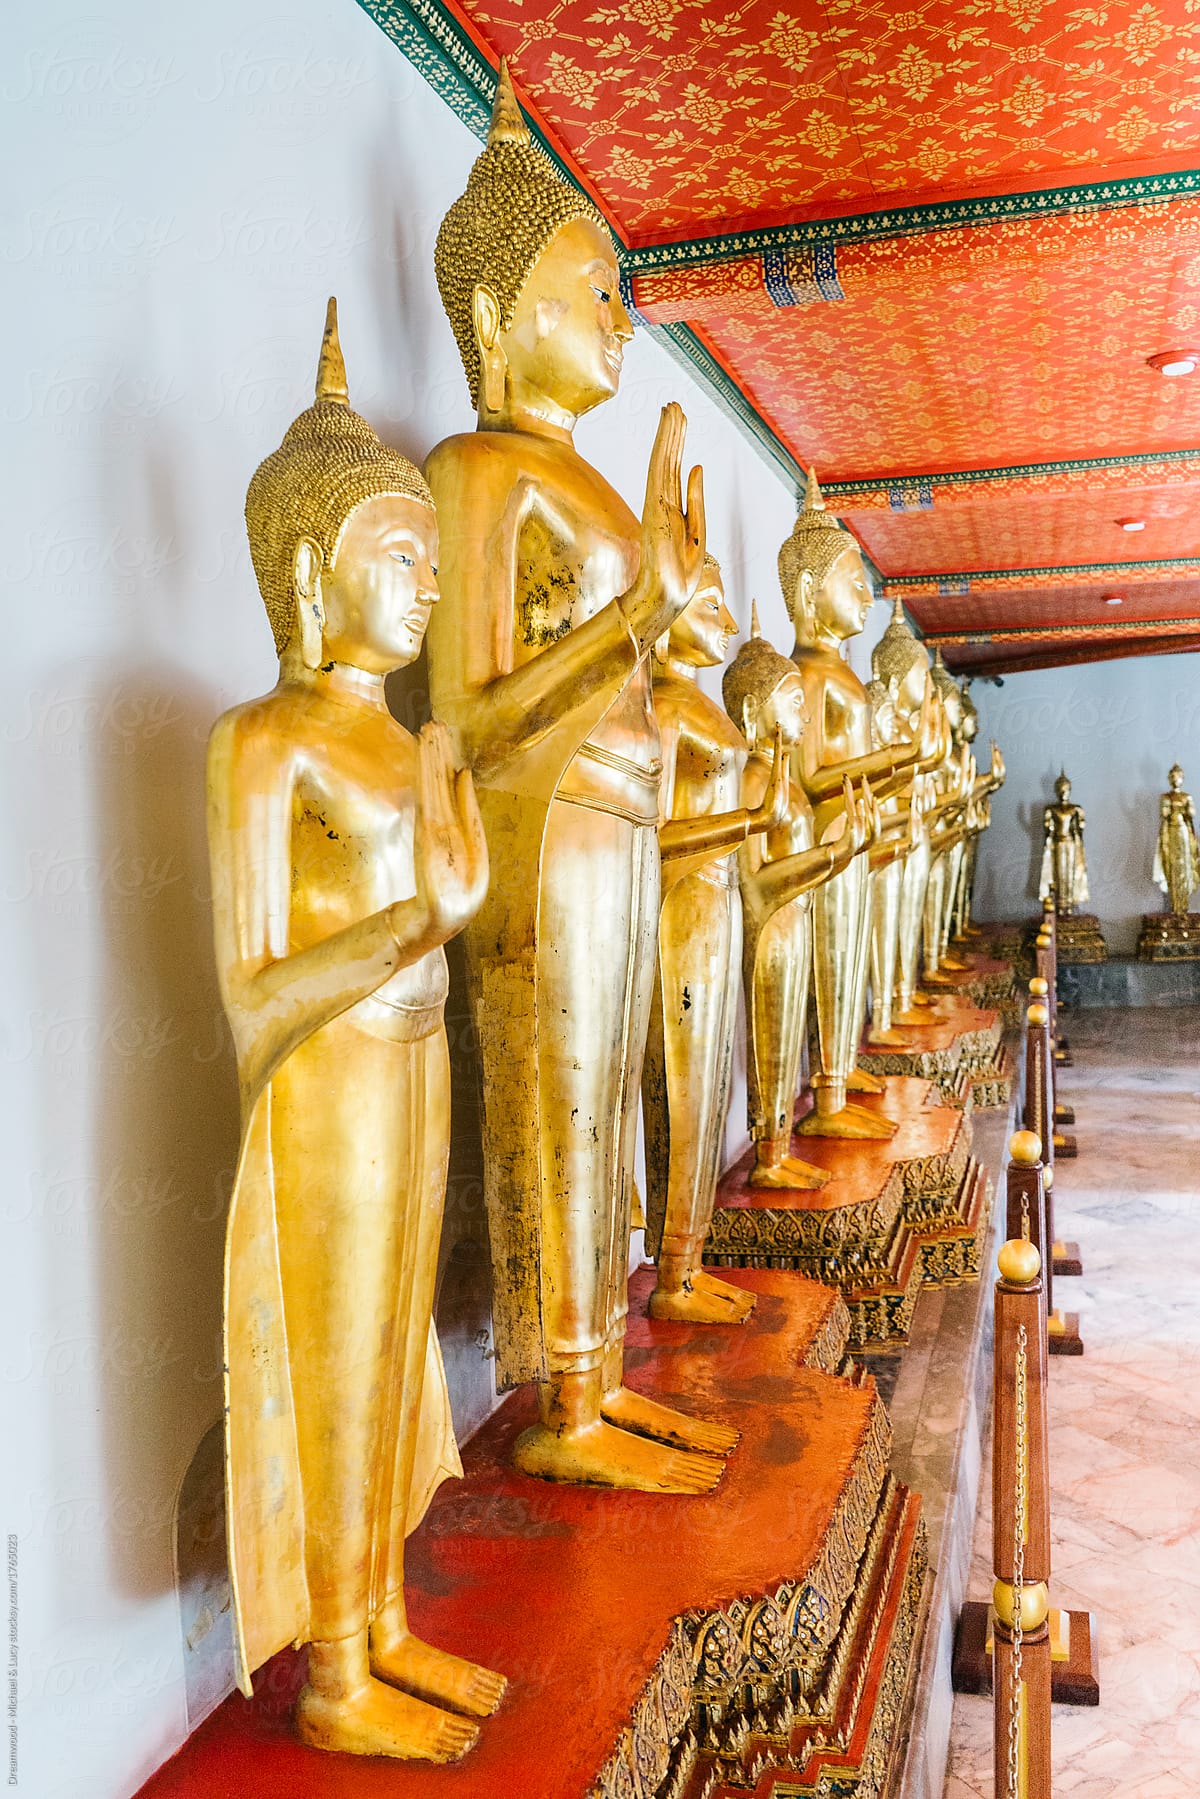 Arranged row of golden statues in temple